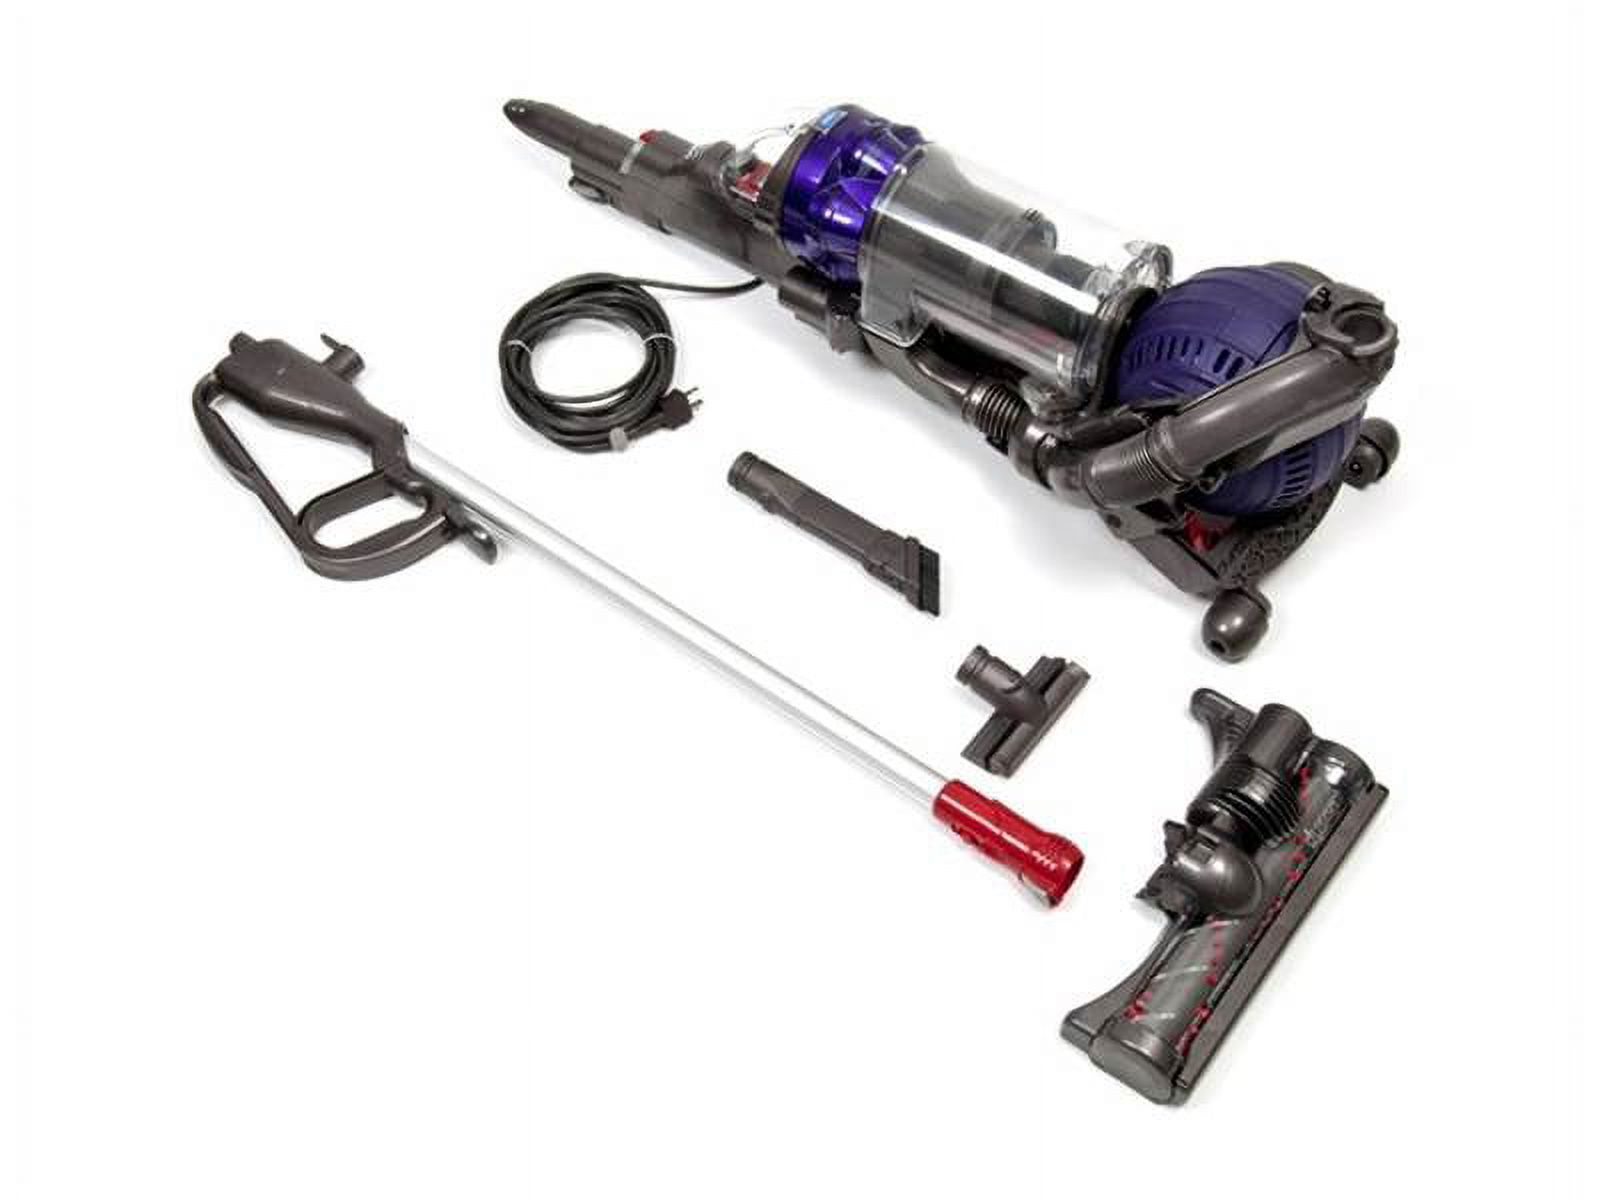 New Dyson 17418-01 DC25 The Ball Animal All-Floor Upright Bagless Vacuum Cleaner - image 4 of 12